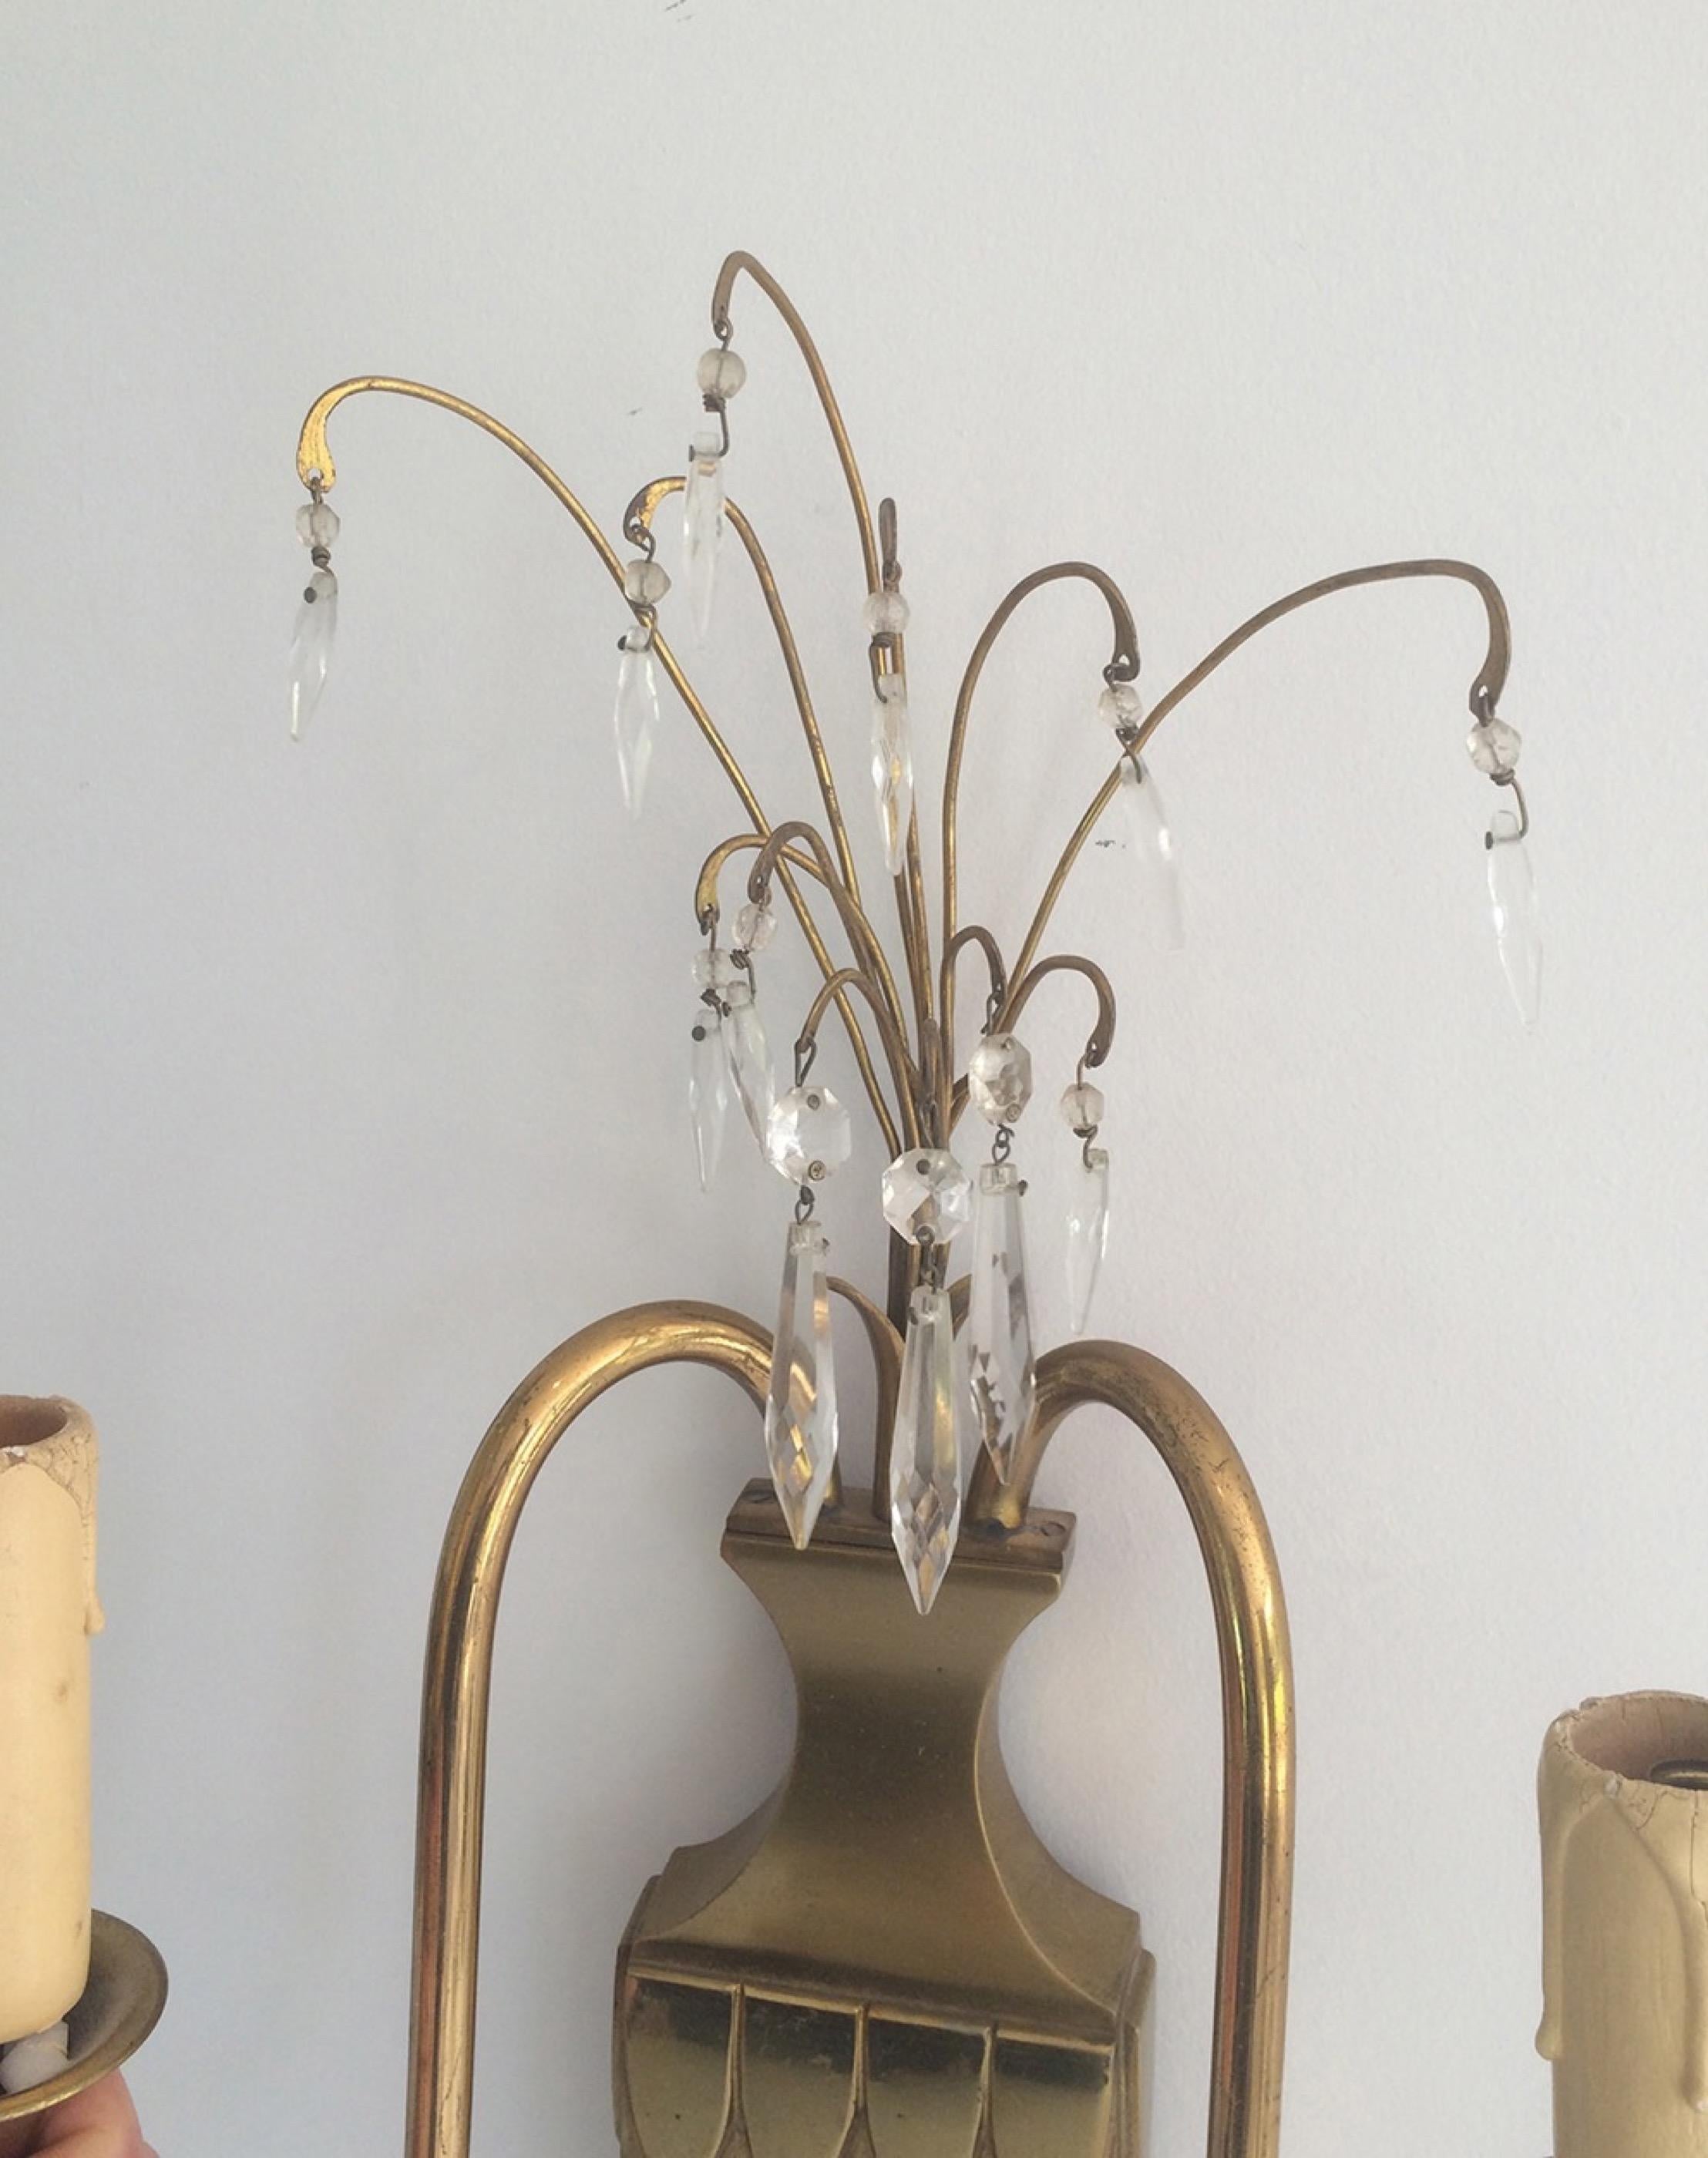 Pair of Decorative Neoclassical Brass & Crystal Wall Lights, French, circa 1940 For Sale 2